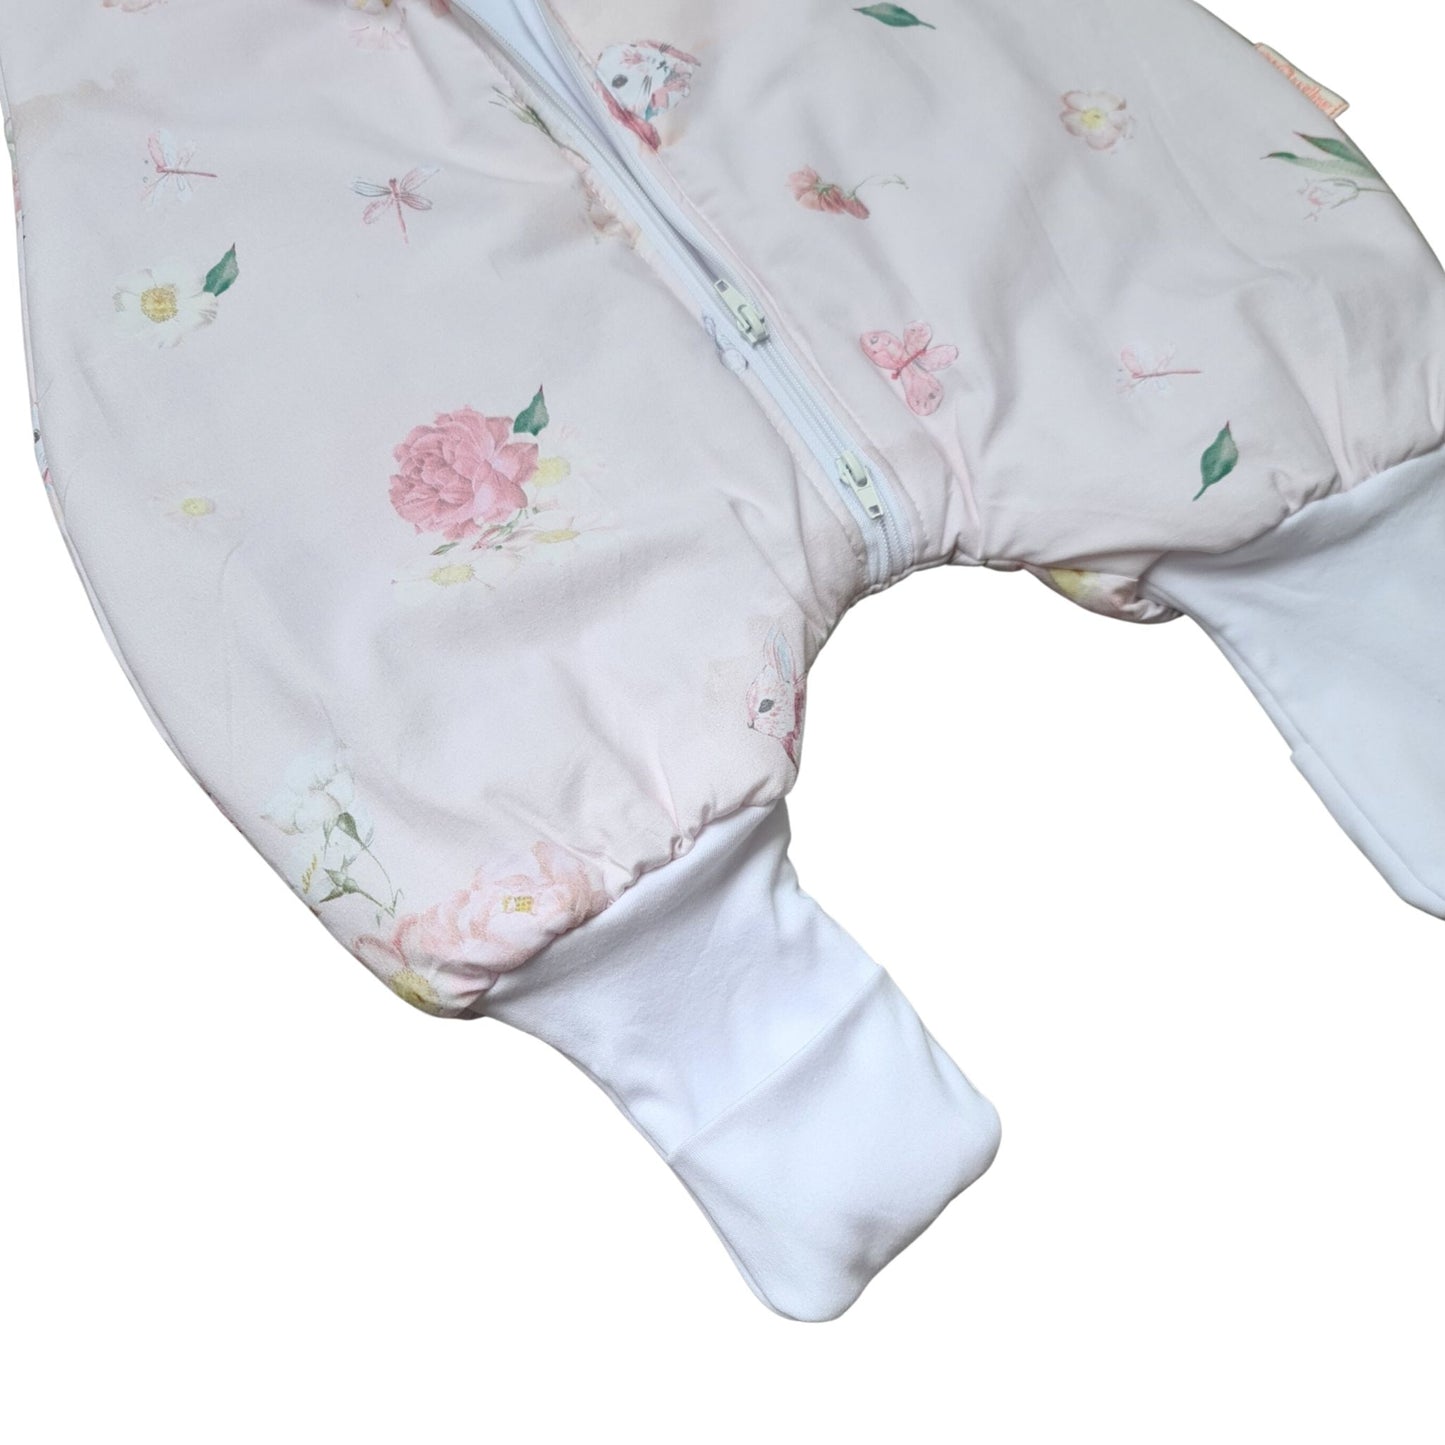 baby toddler sleeping bag with feet pink bunny 100% cotton 2.5 tog all year round with foldable feet